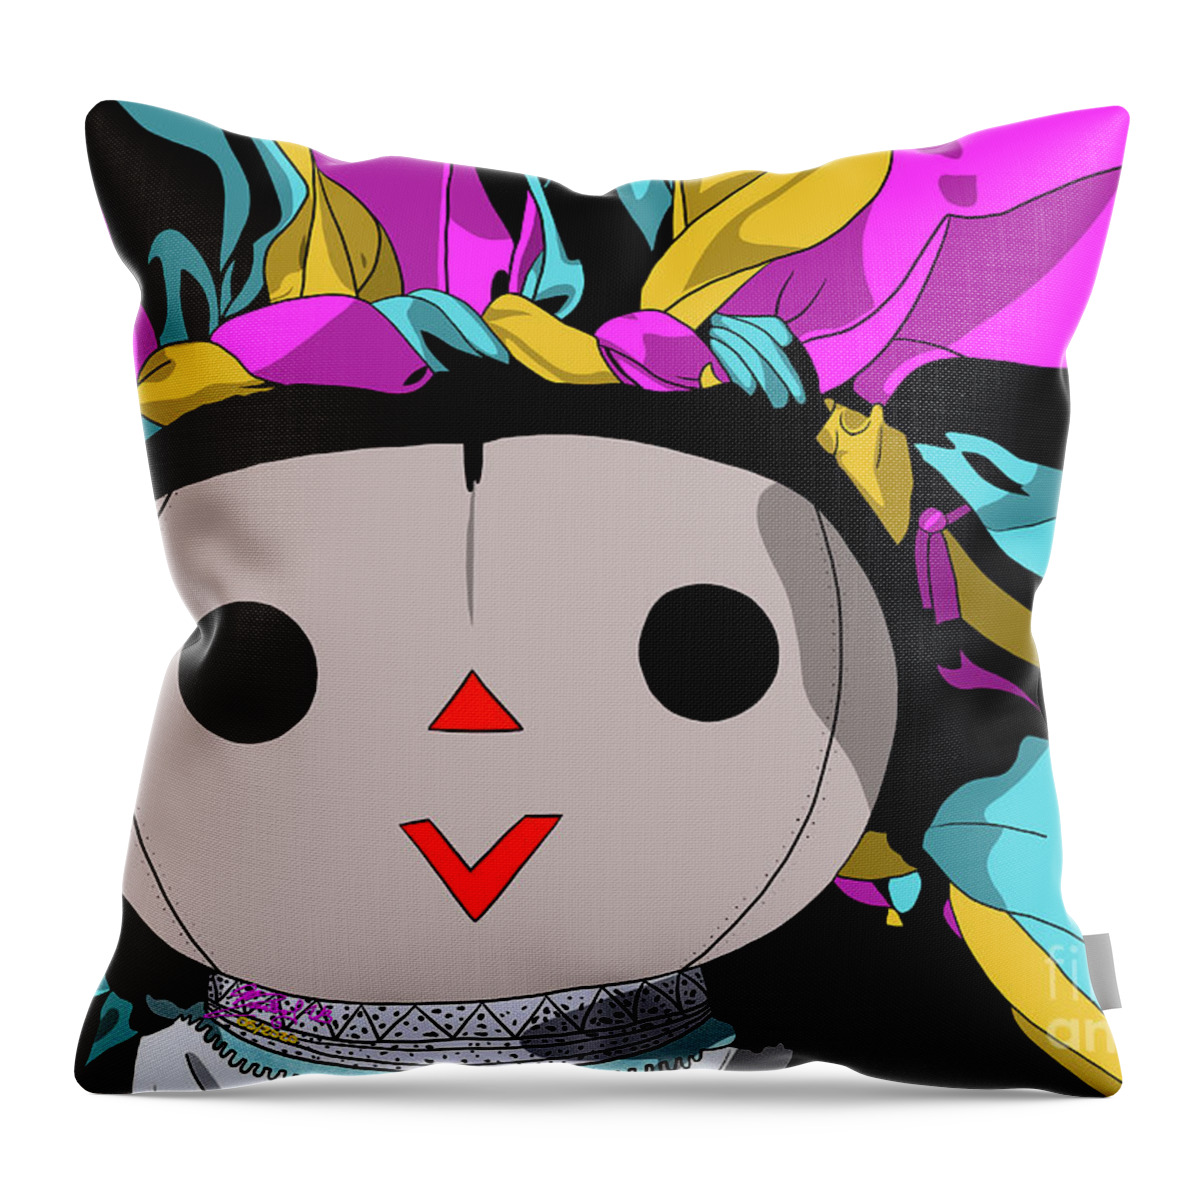 Mazahua Throw Pillow featuring the digital art Maria Doll yellow pink turquoise by Marisol VB